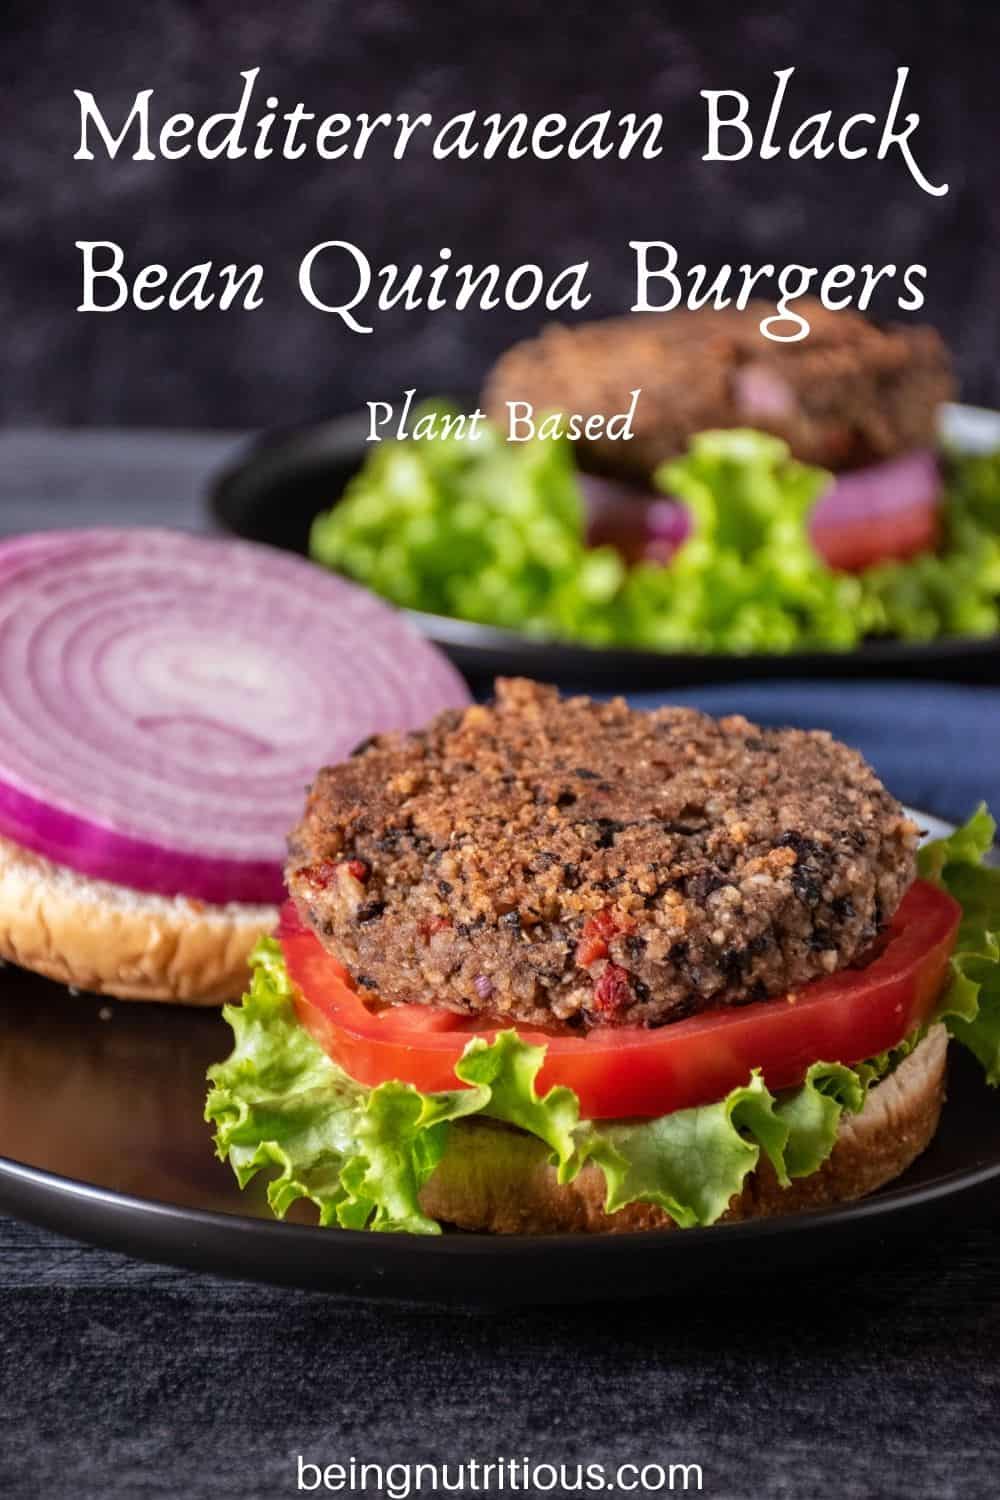 Bean burger on an open bun, with onions, tomatoes, and lettuce. Text overlay: Mediterranean Black Bean Quinoa Burgers; Plant Based.